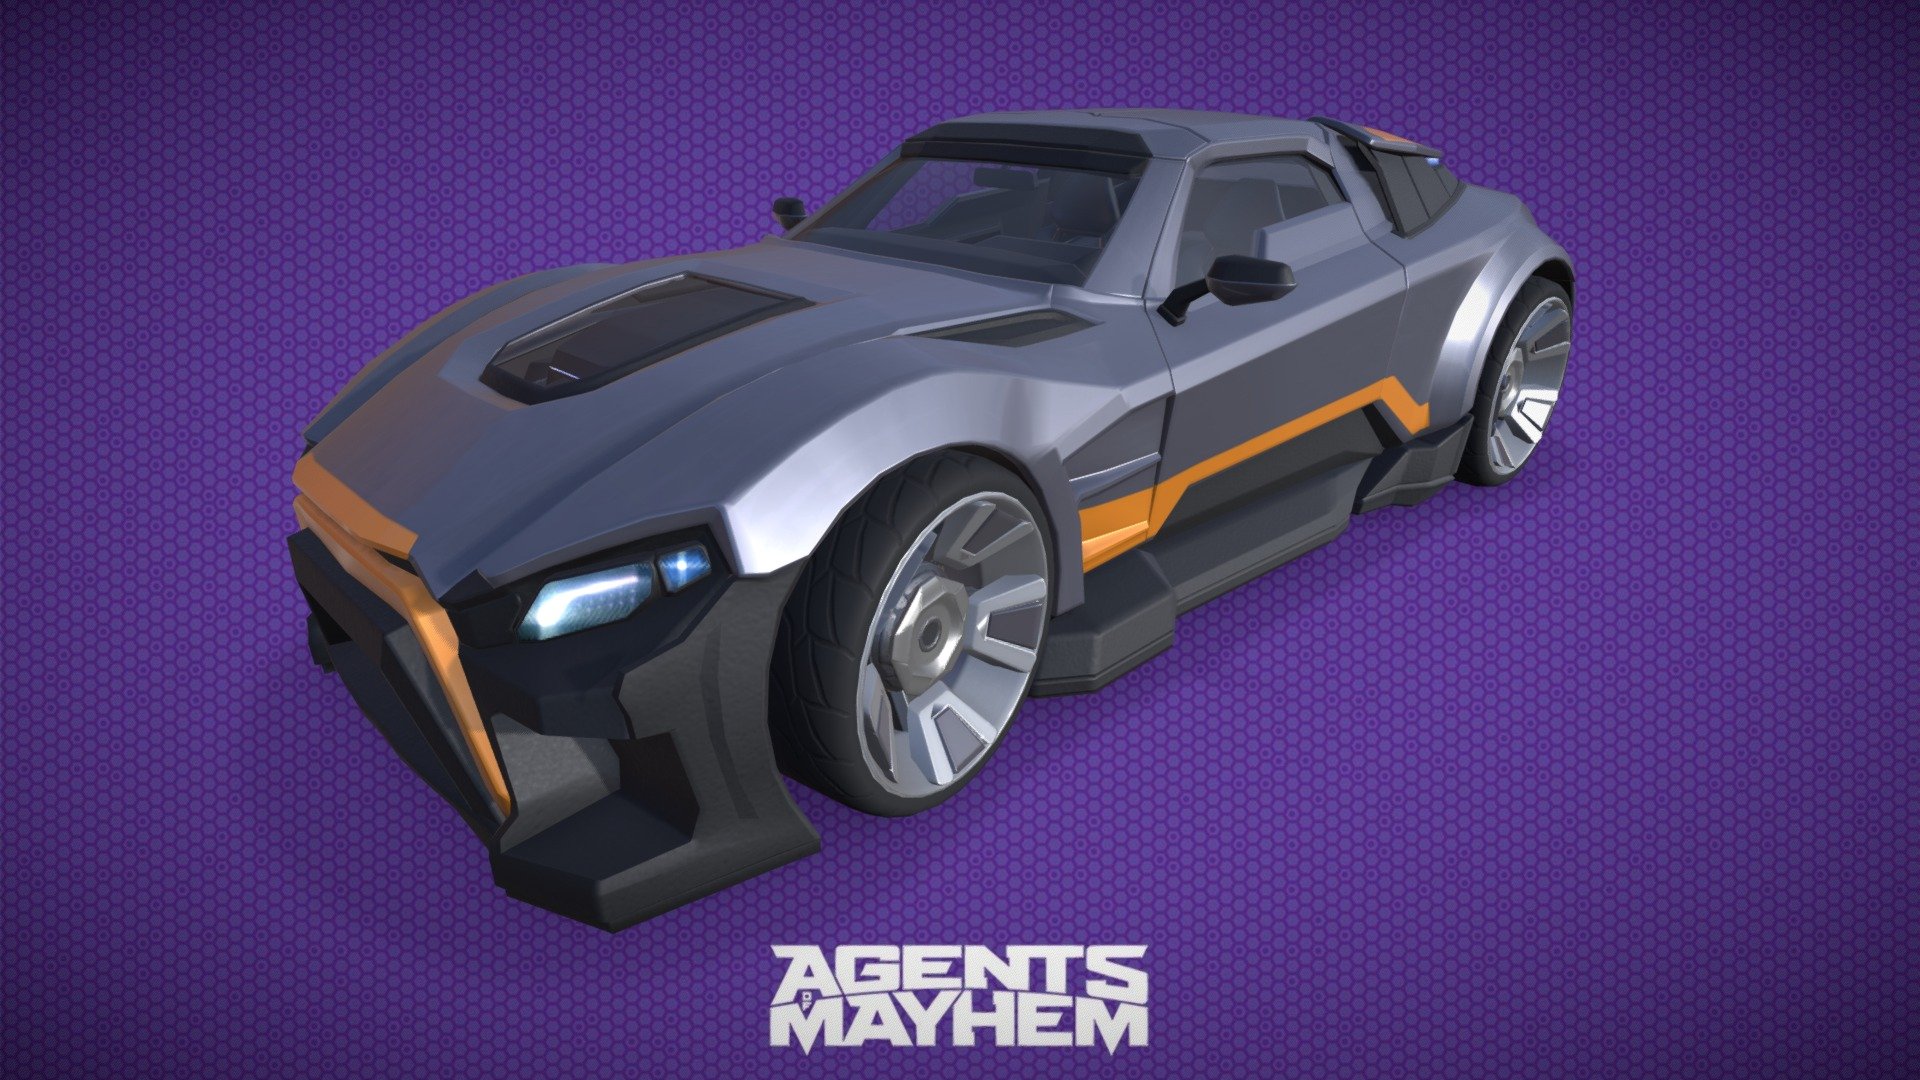 Torch Agent vehicle modeled for Agents of Mayhem game.

Modeled from front 3/4 &amp; side view concepts 3d model